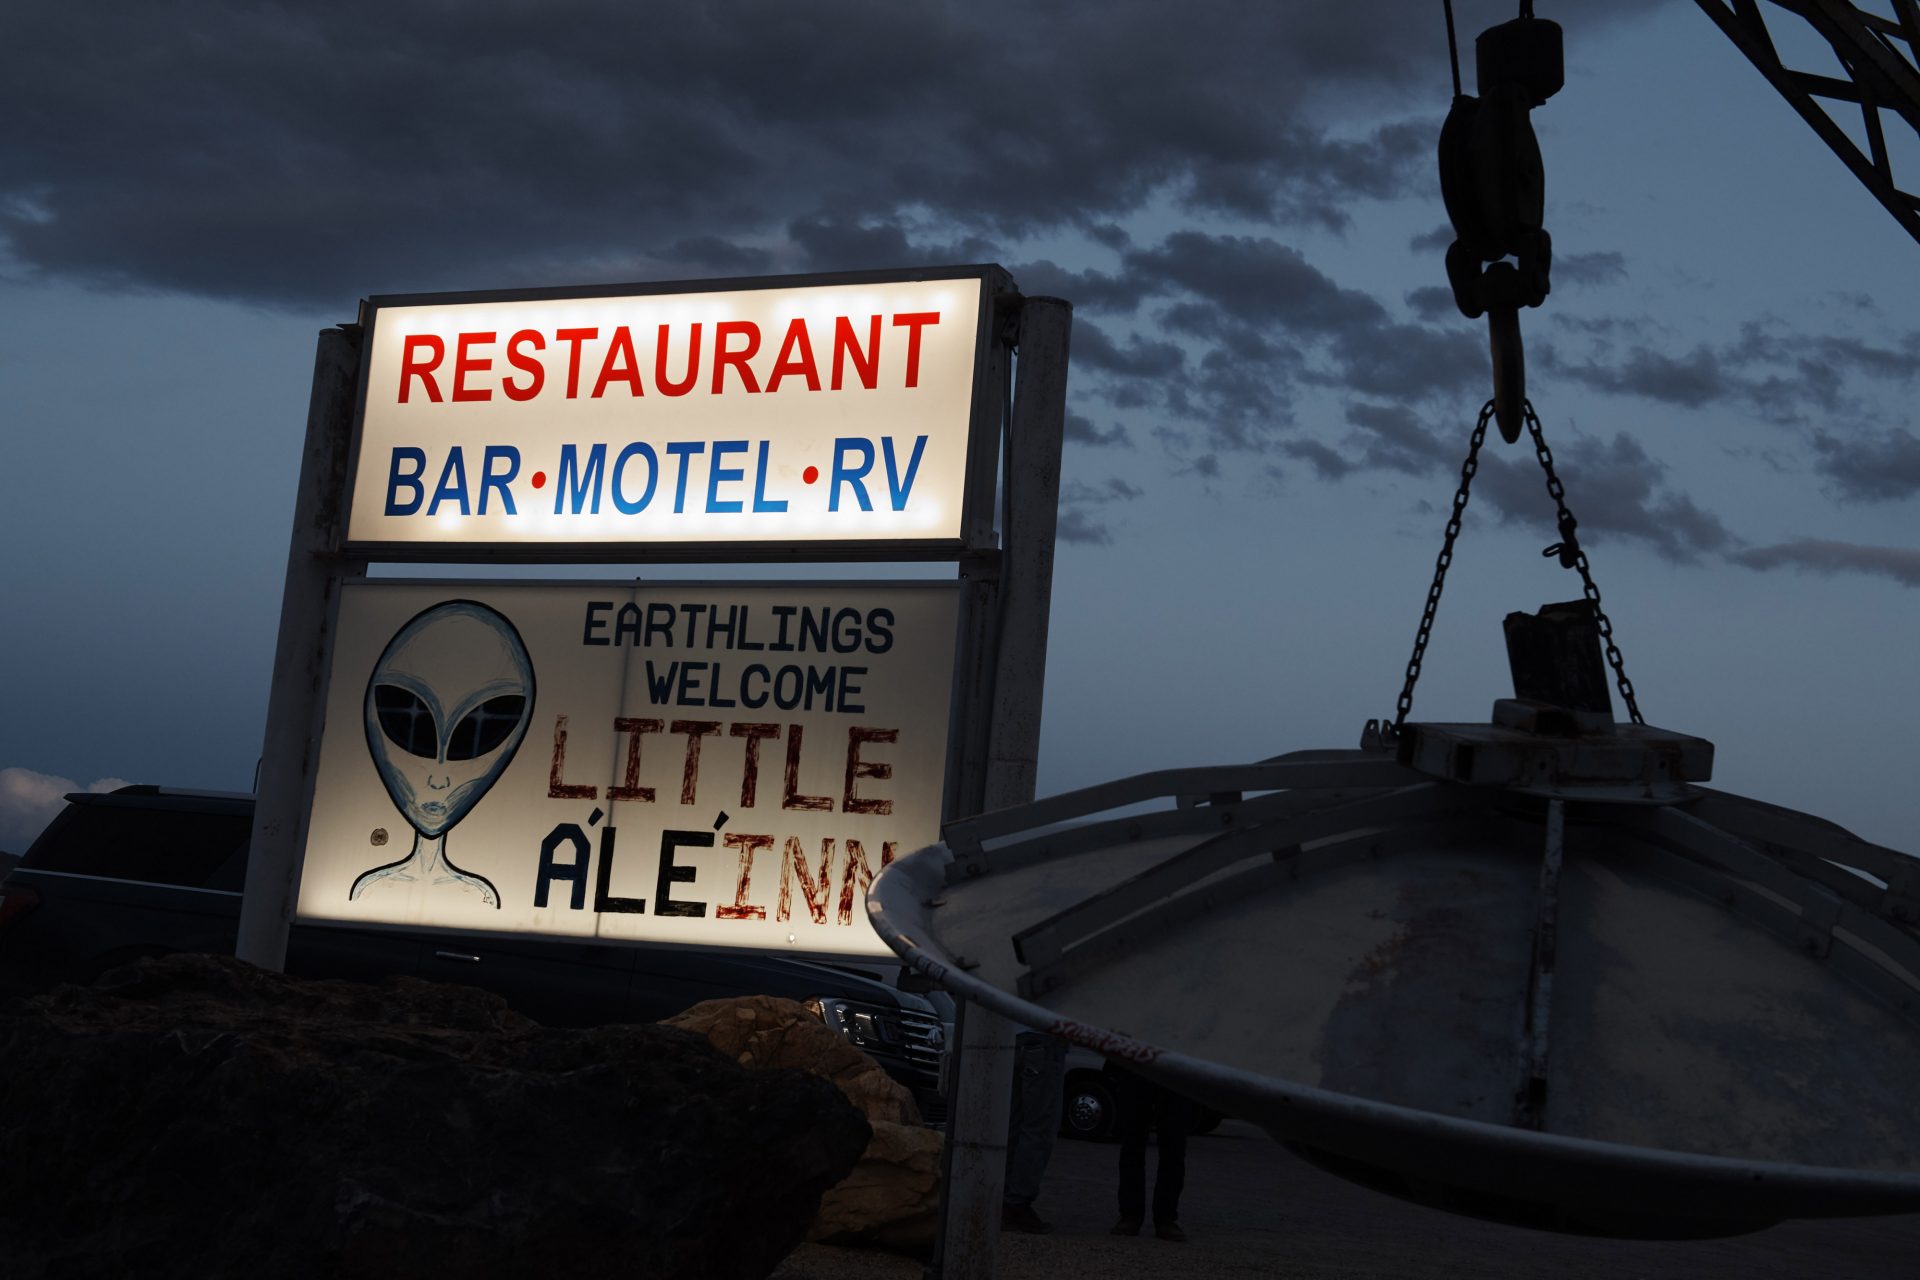 Area 51: the area's best-known motel